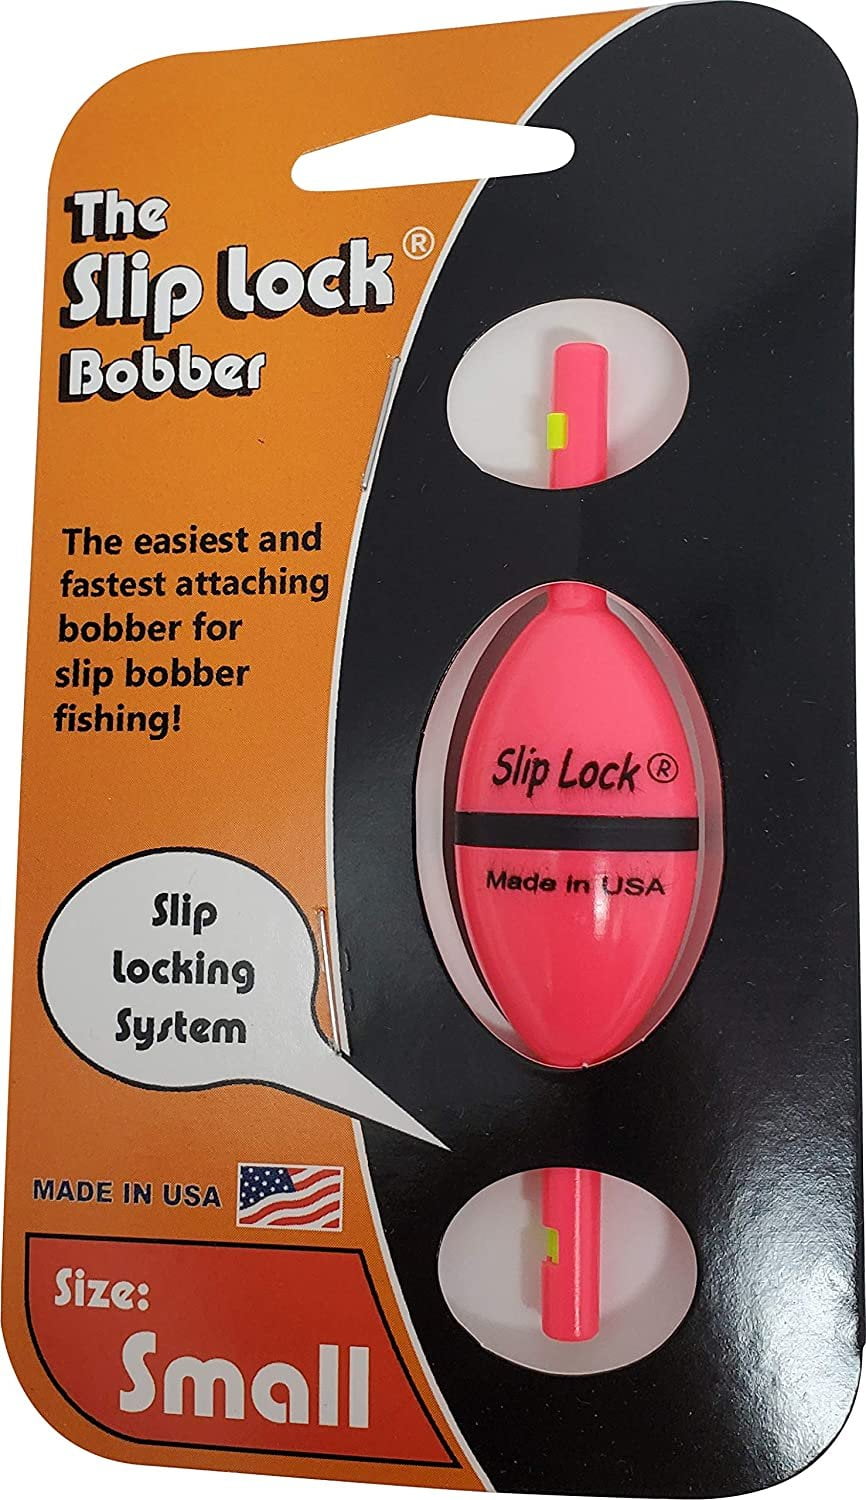 Easy to See Bobber Float, Seeing Impaired Bobber, Large Top Floats